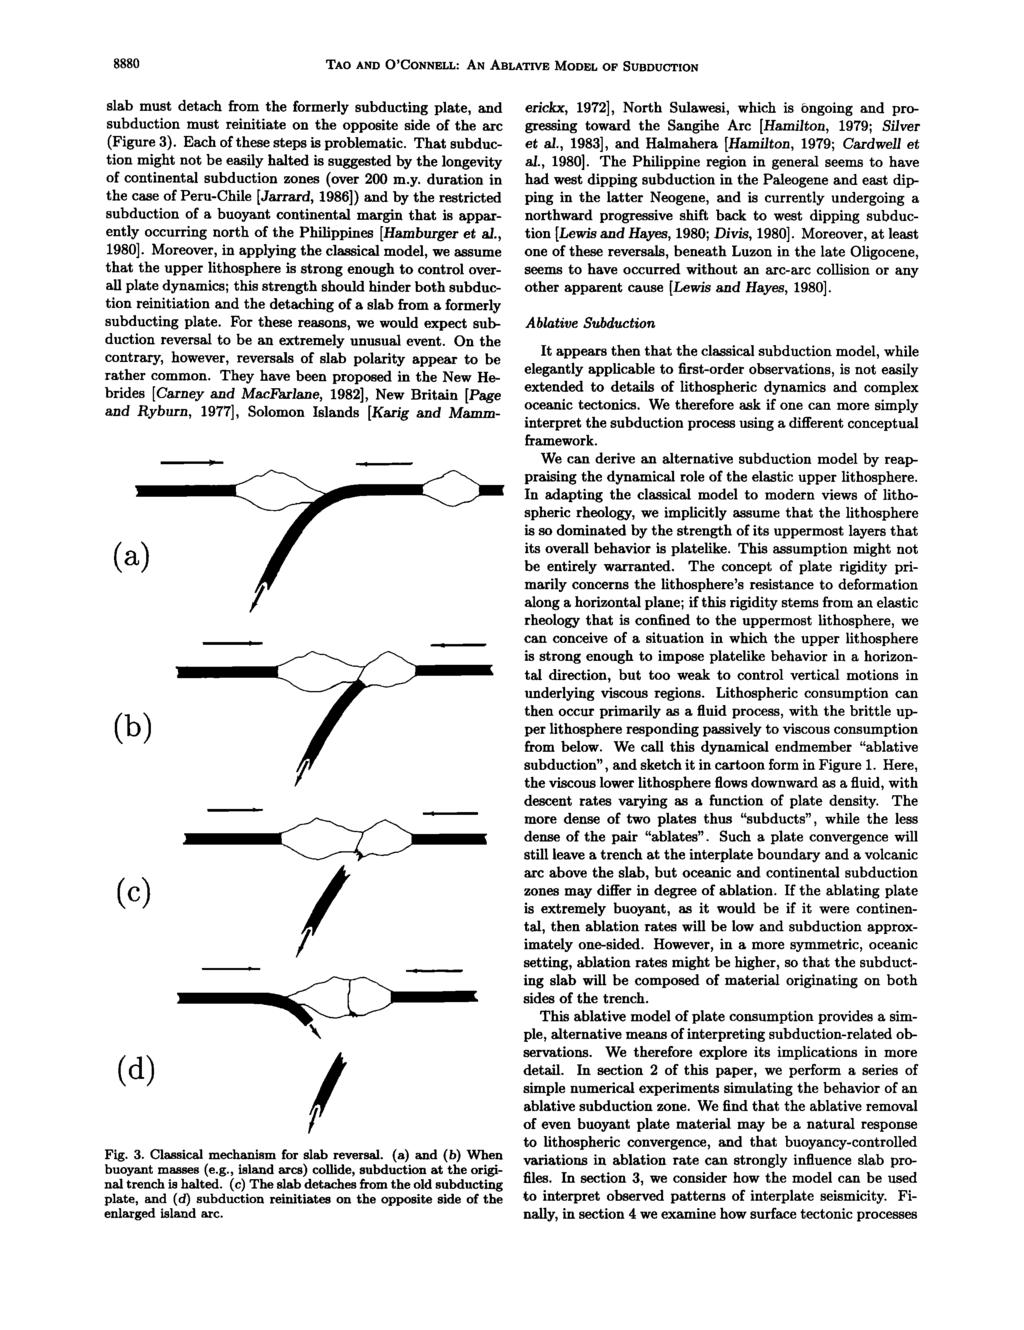 8880 TAO AND O'CONNELL: AN ABLATIVE MODEL OF SUBDUCTION slab must detach from the formerly subducting plate, and subduction must reinitiate on the opposite side of the arc (Figure 3).